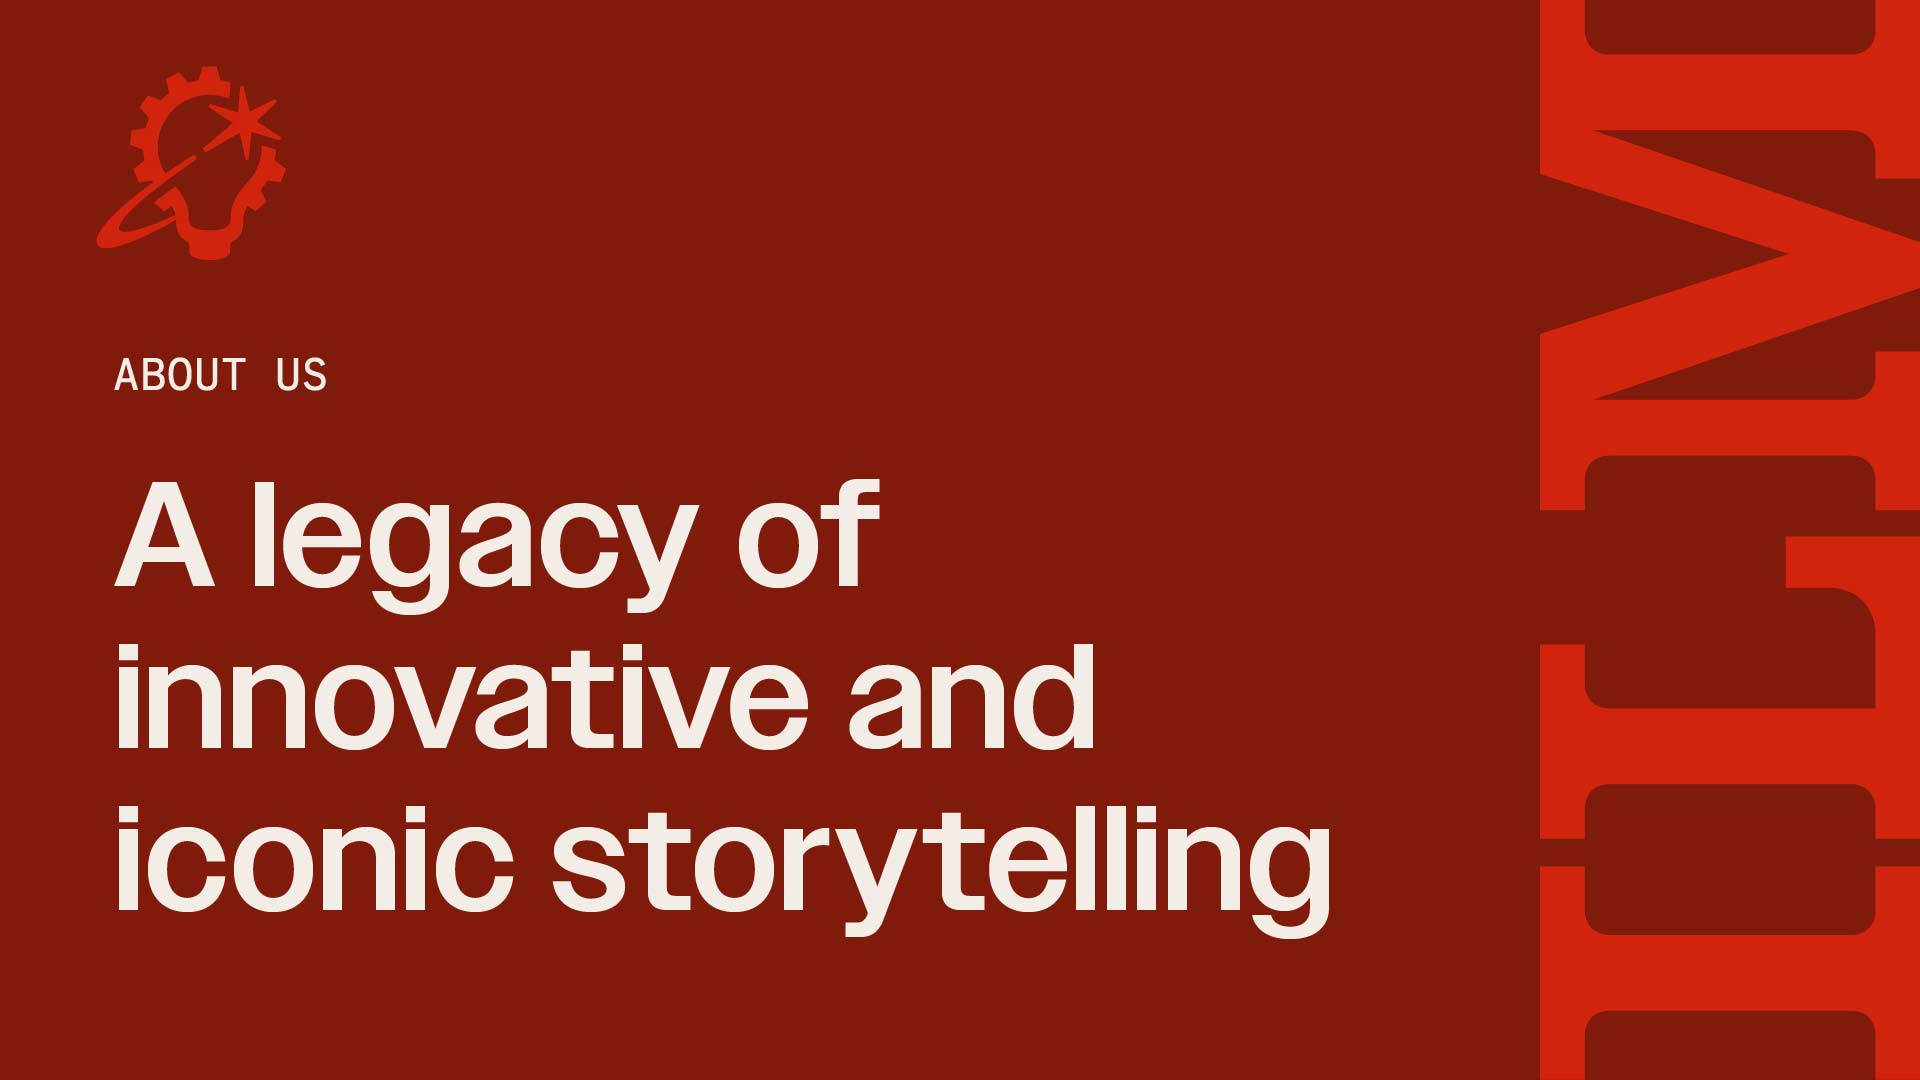 "A legacy of innovative and iconic storytelling"